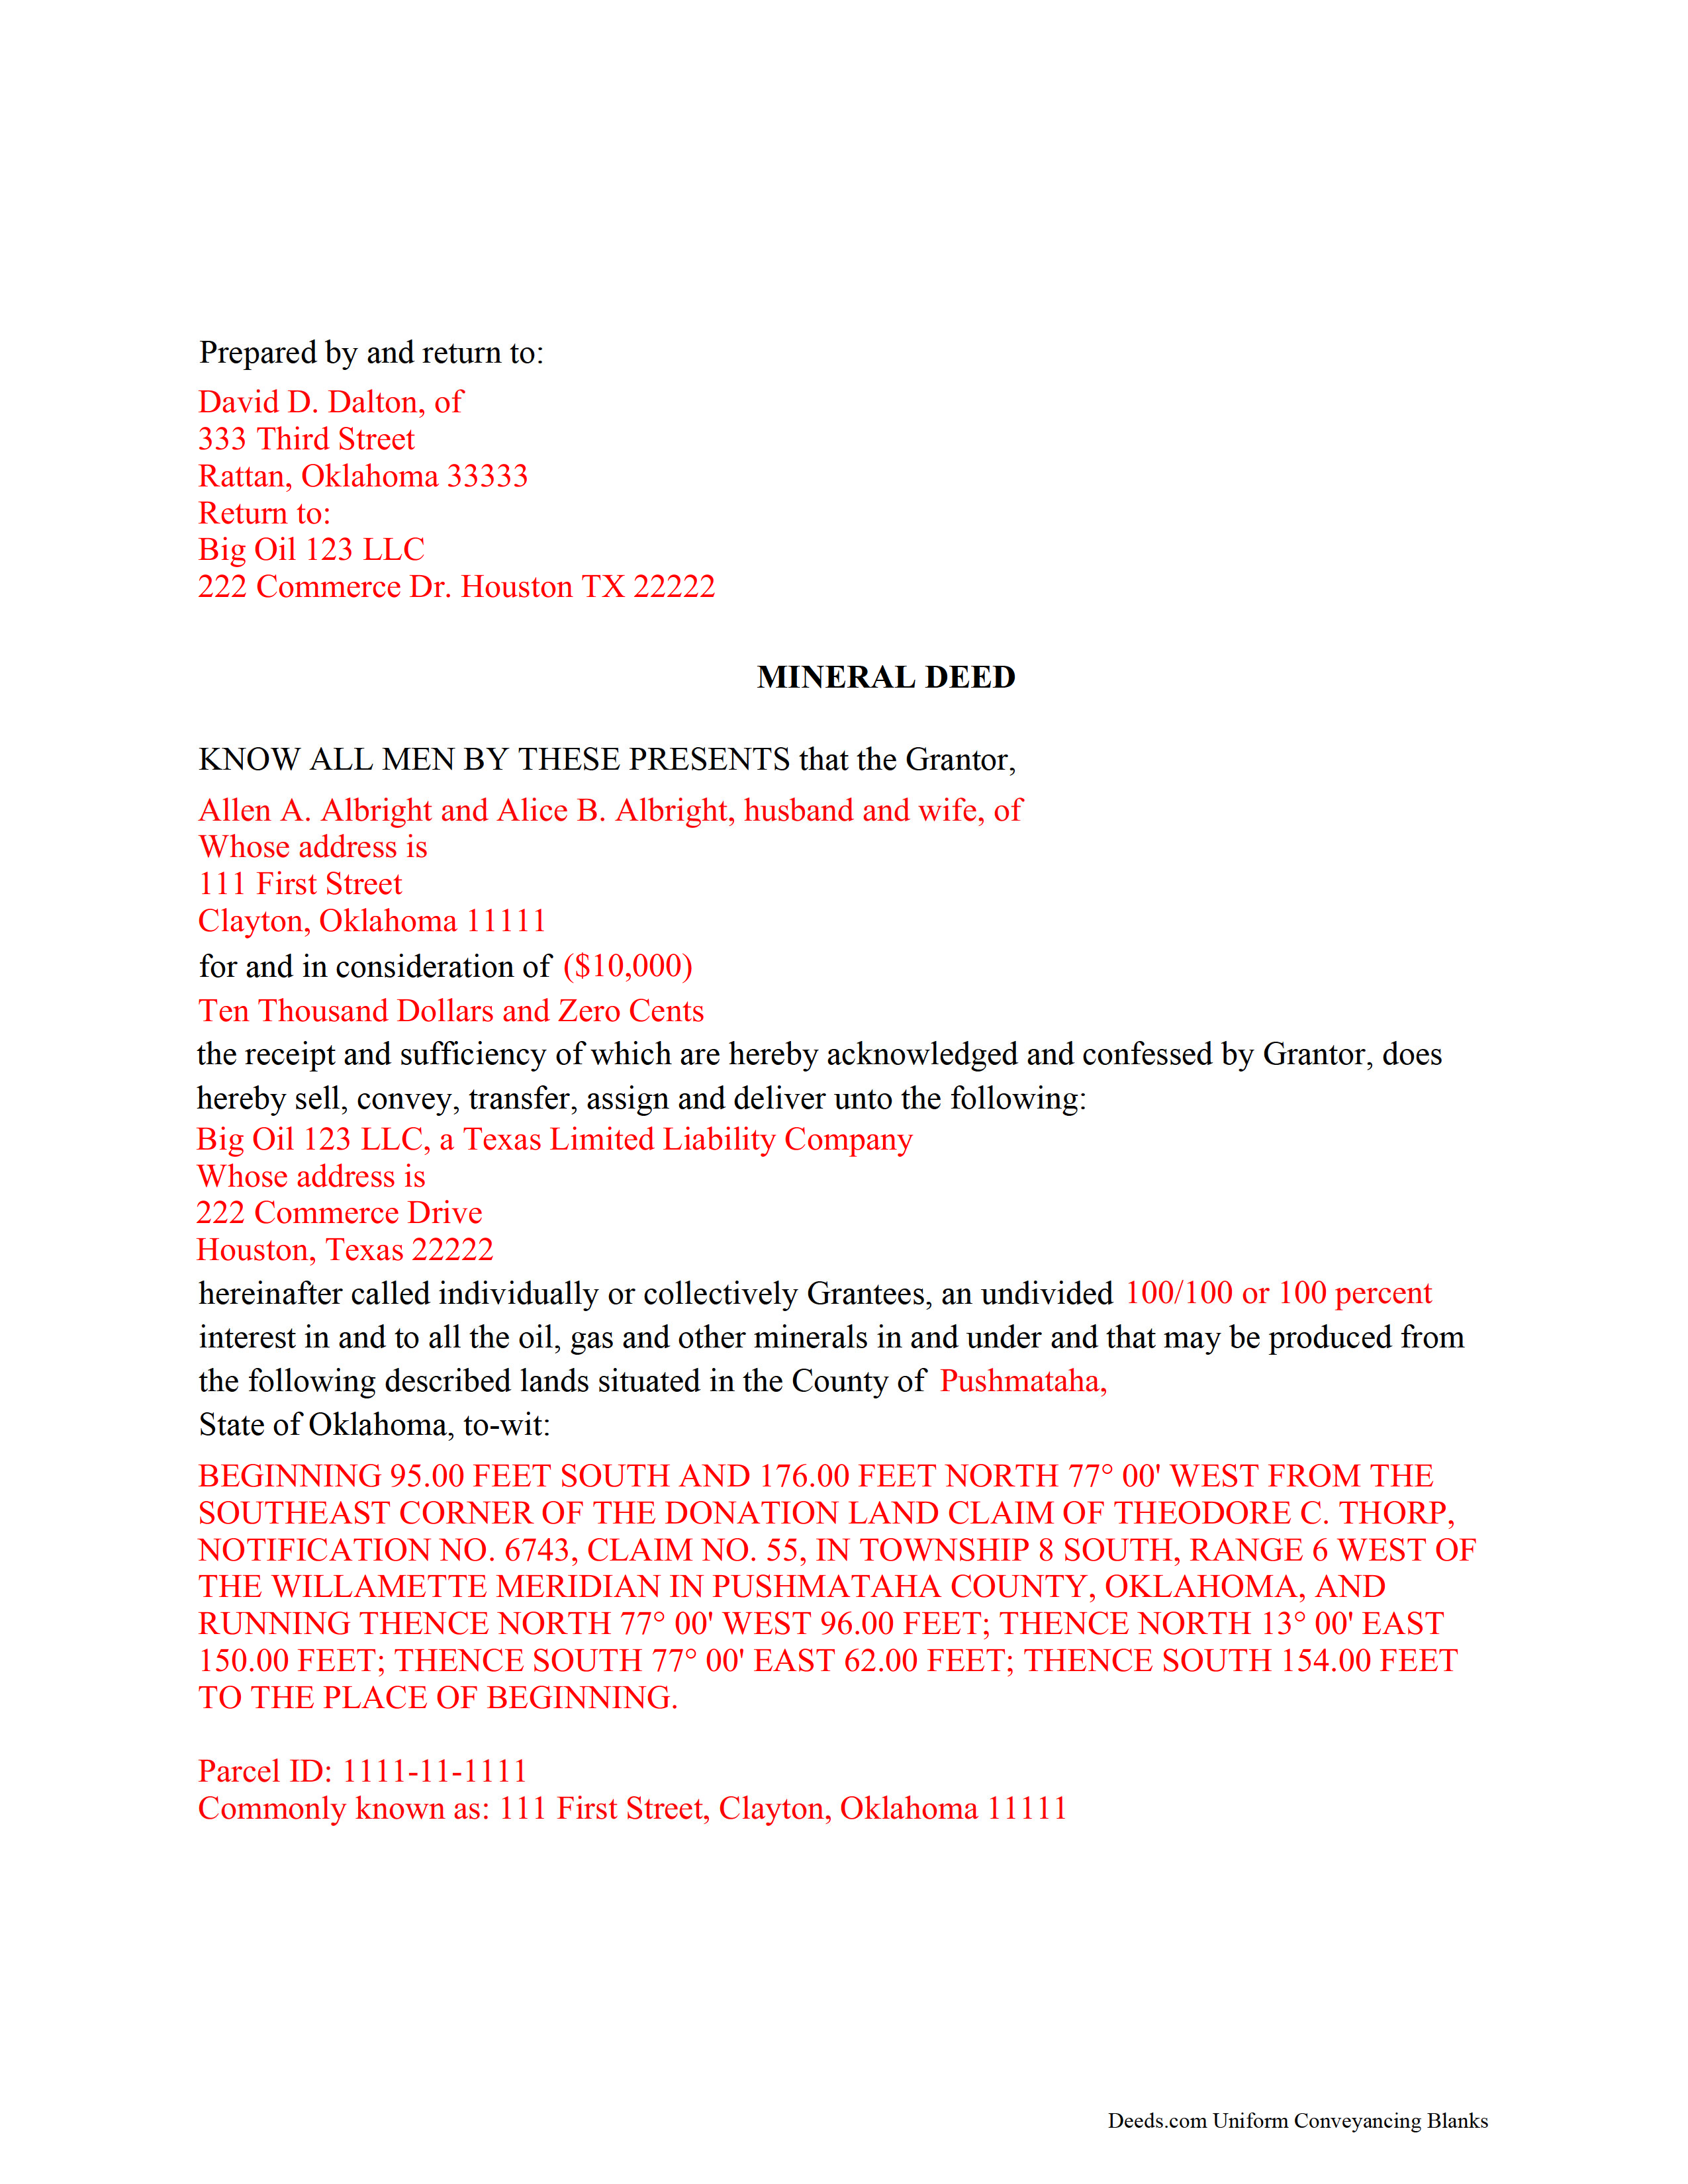 Completed Example of the Mineral Deed Document